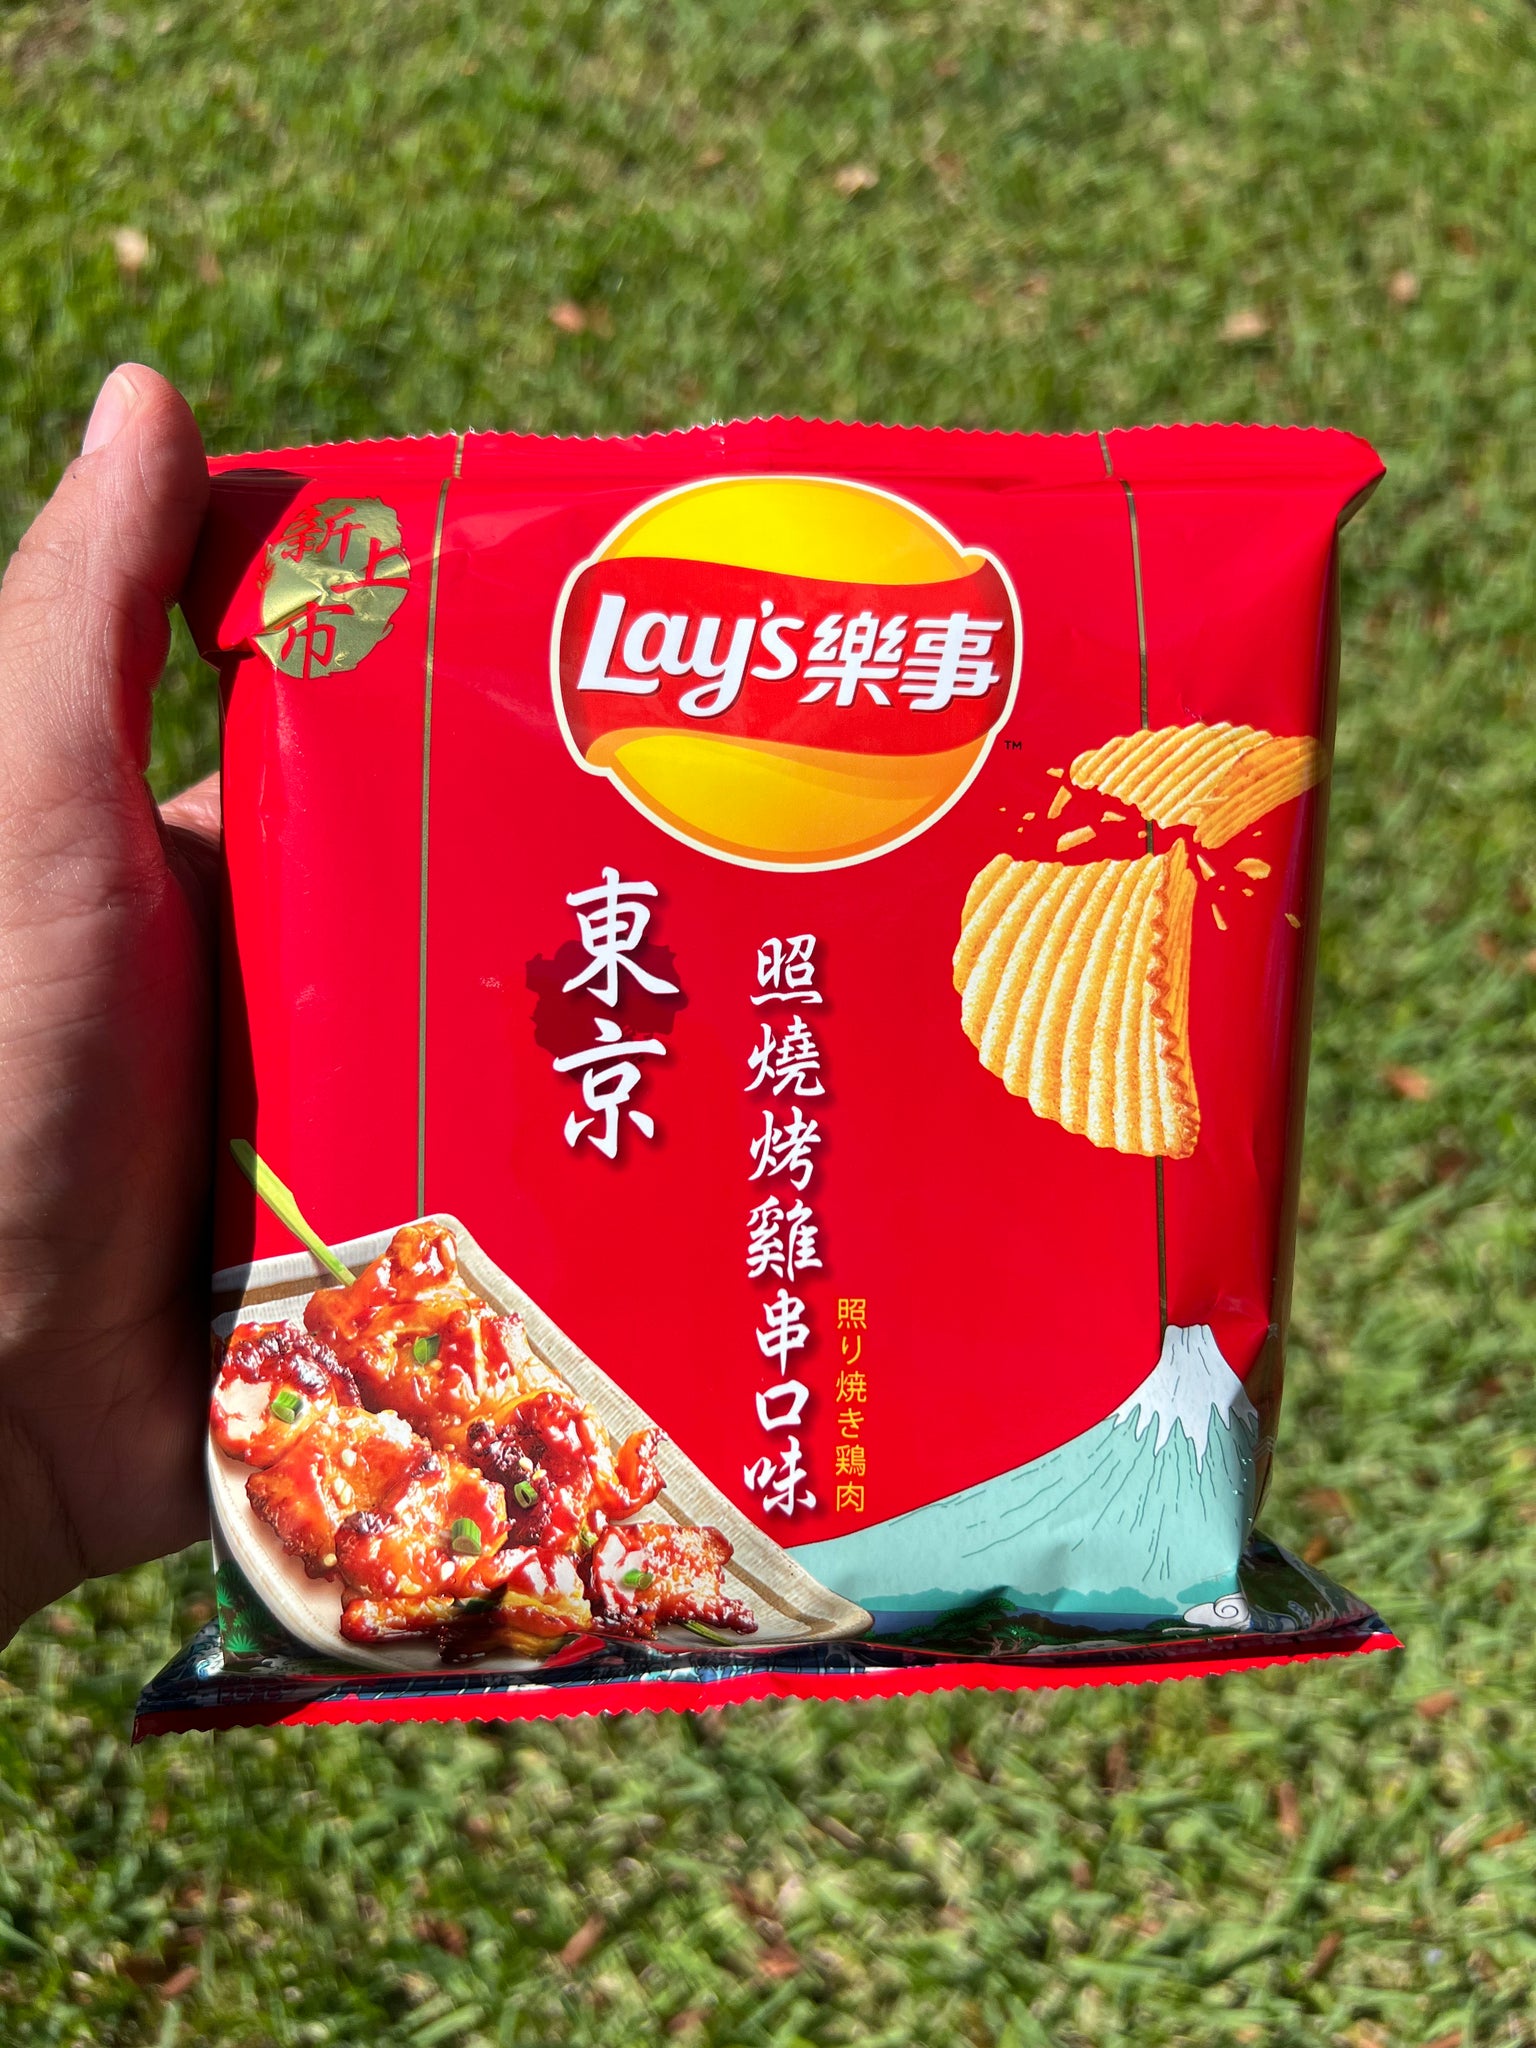 Lay’s Grilled Chicken Skewer (Taiwan)